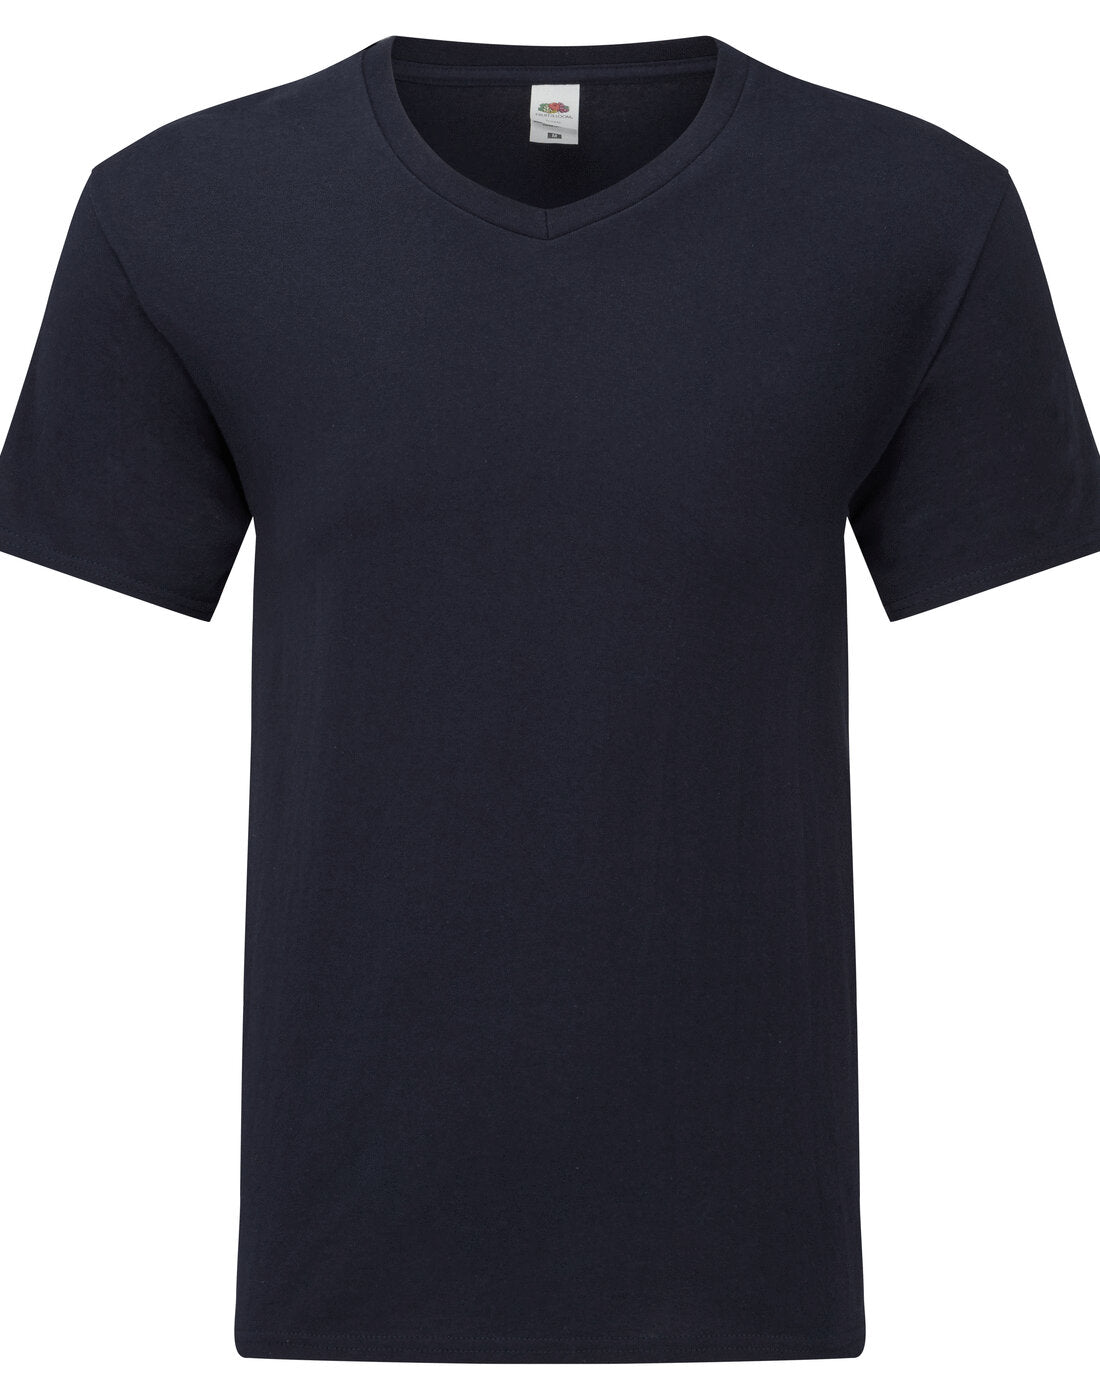 Fruit of the Loom Iconic V Neck T - Deep Navy